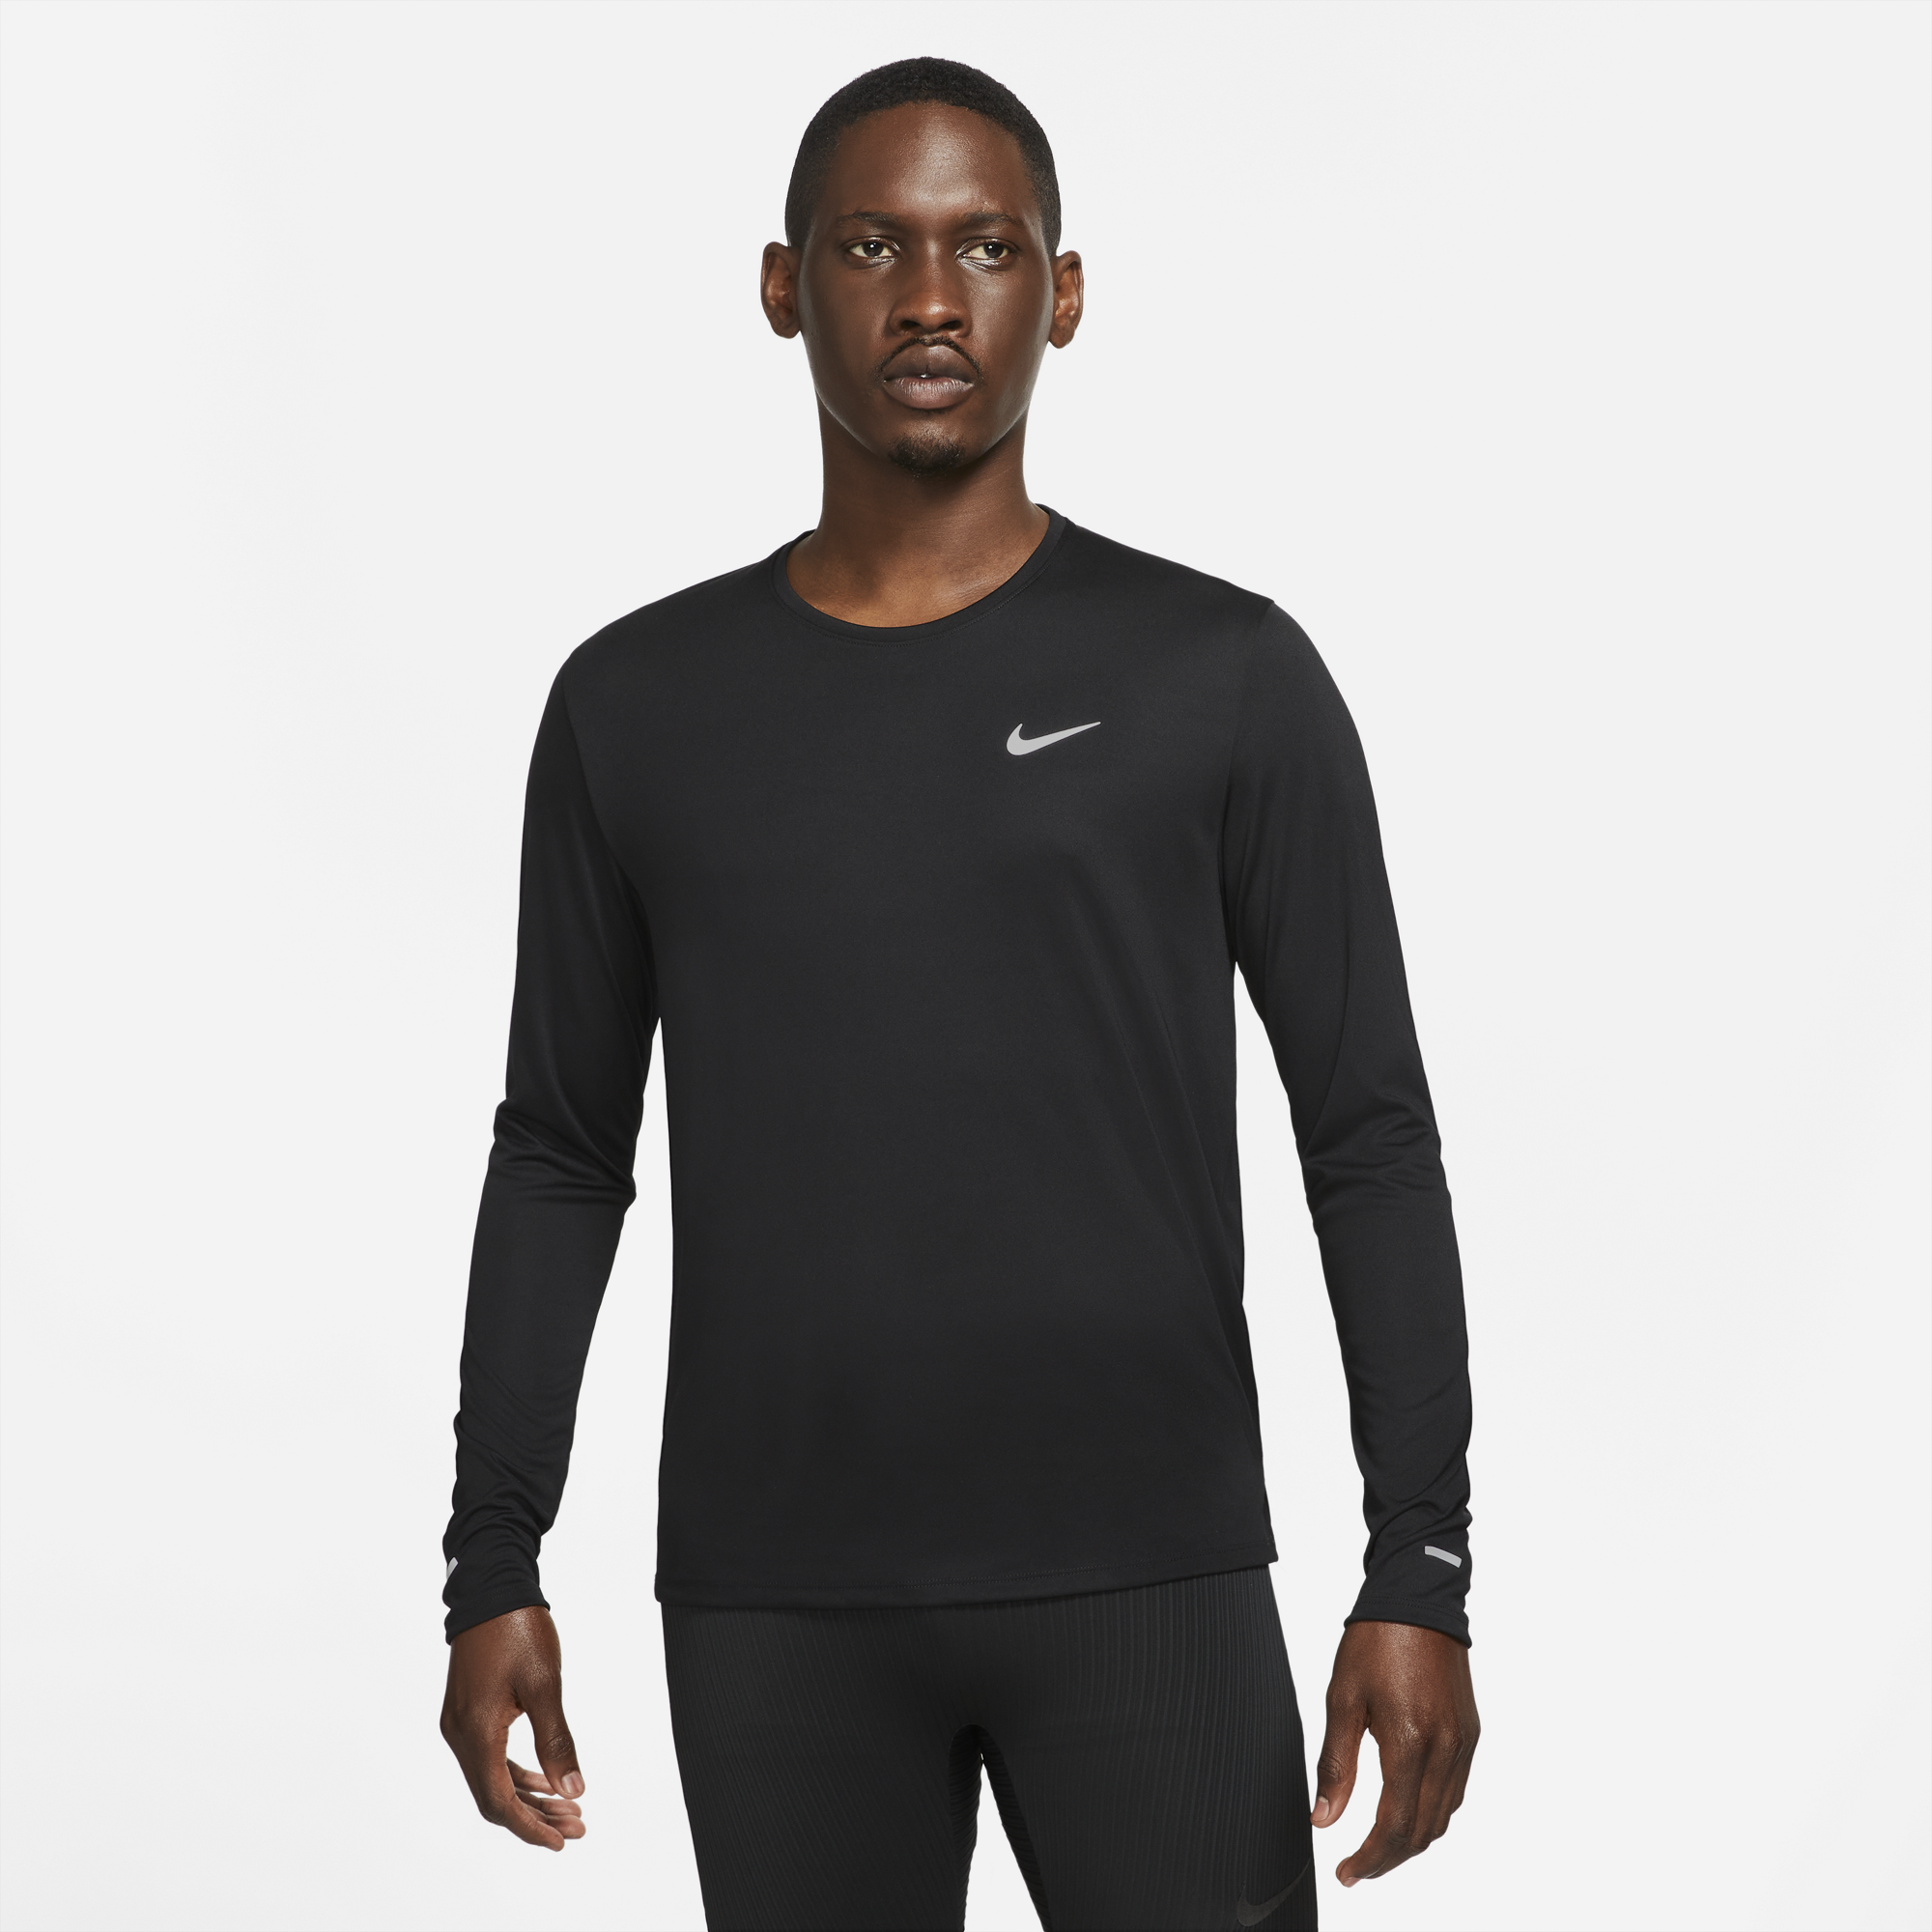 all the best Objection fog Nike Dri-Fit UV Miler Top Long Sleeve | Champs Sports